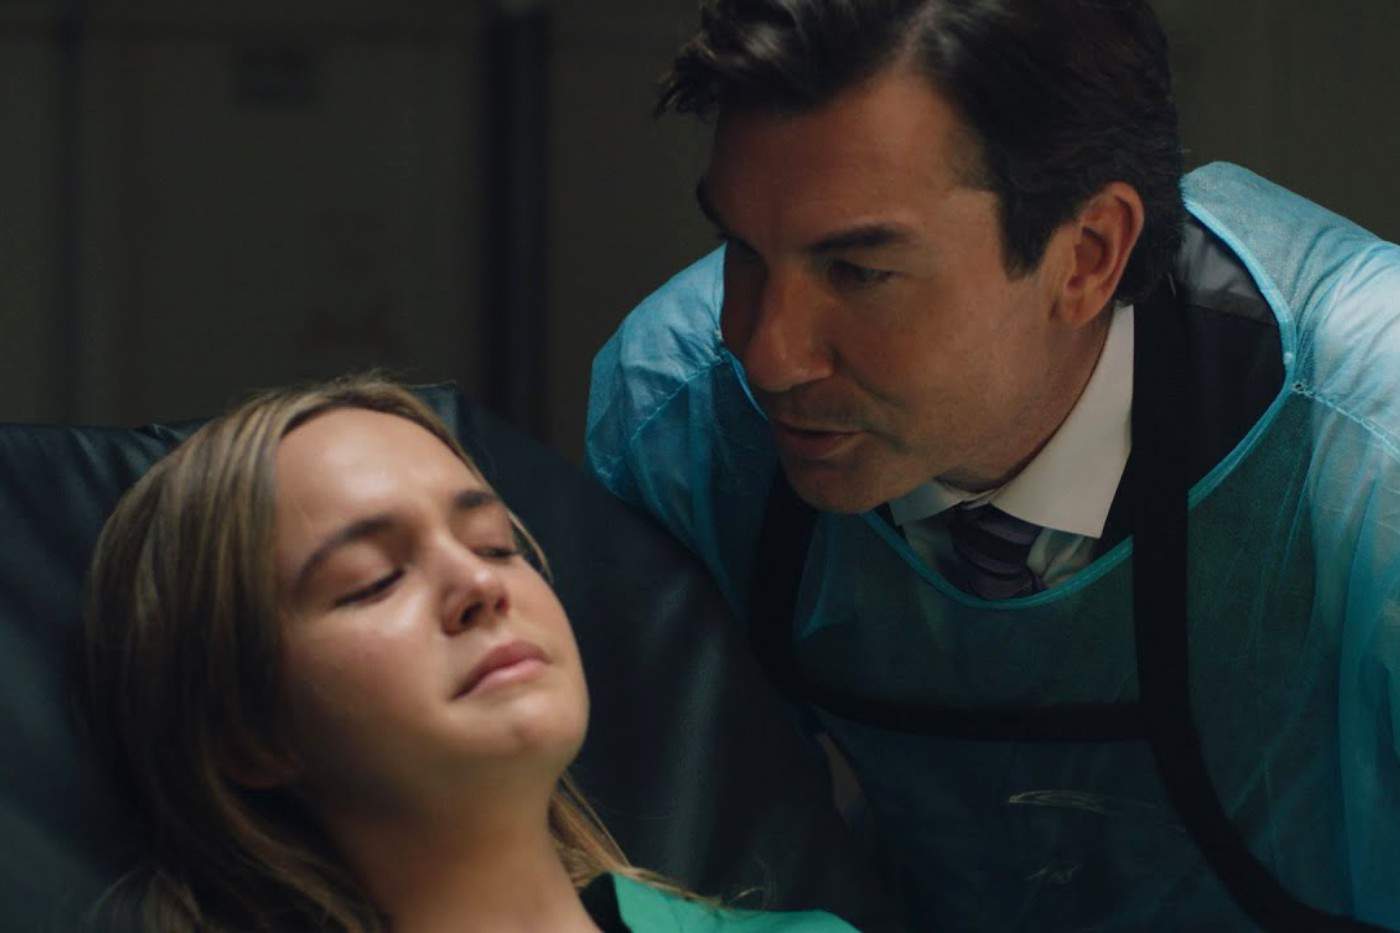 The coroner and Chloe in the morgue in the film, Play Dead (Credits: Vintage Pictures)